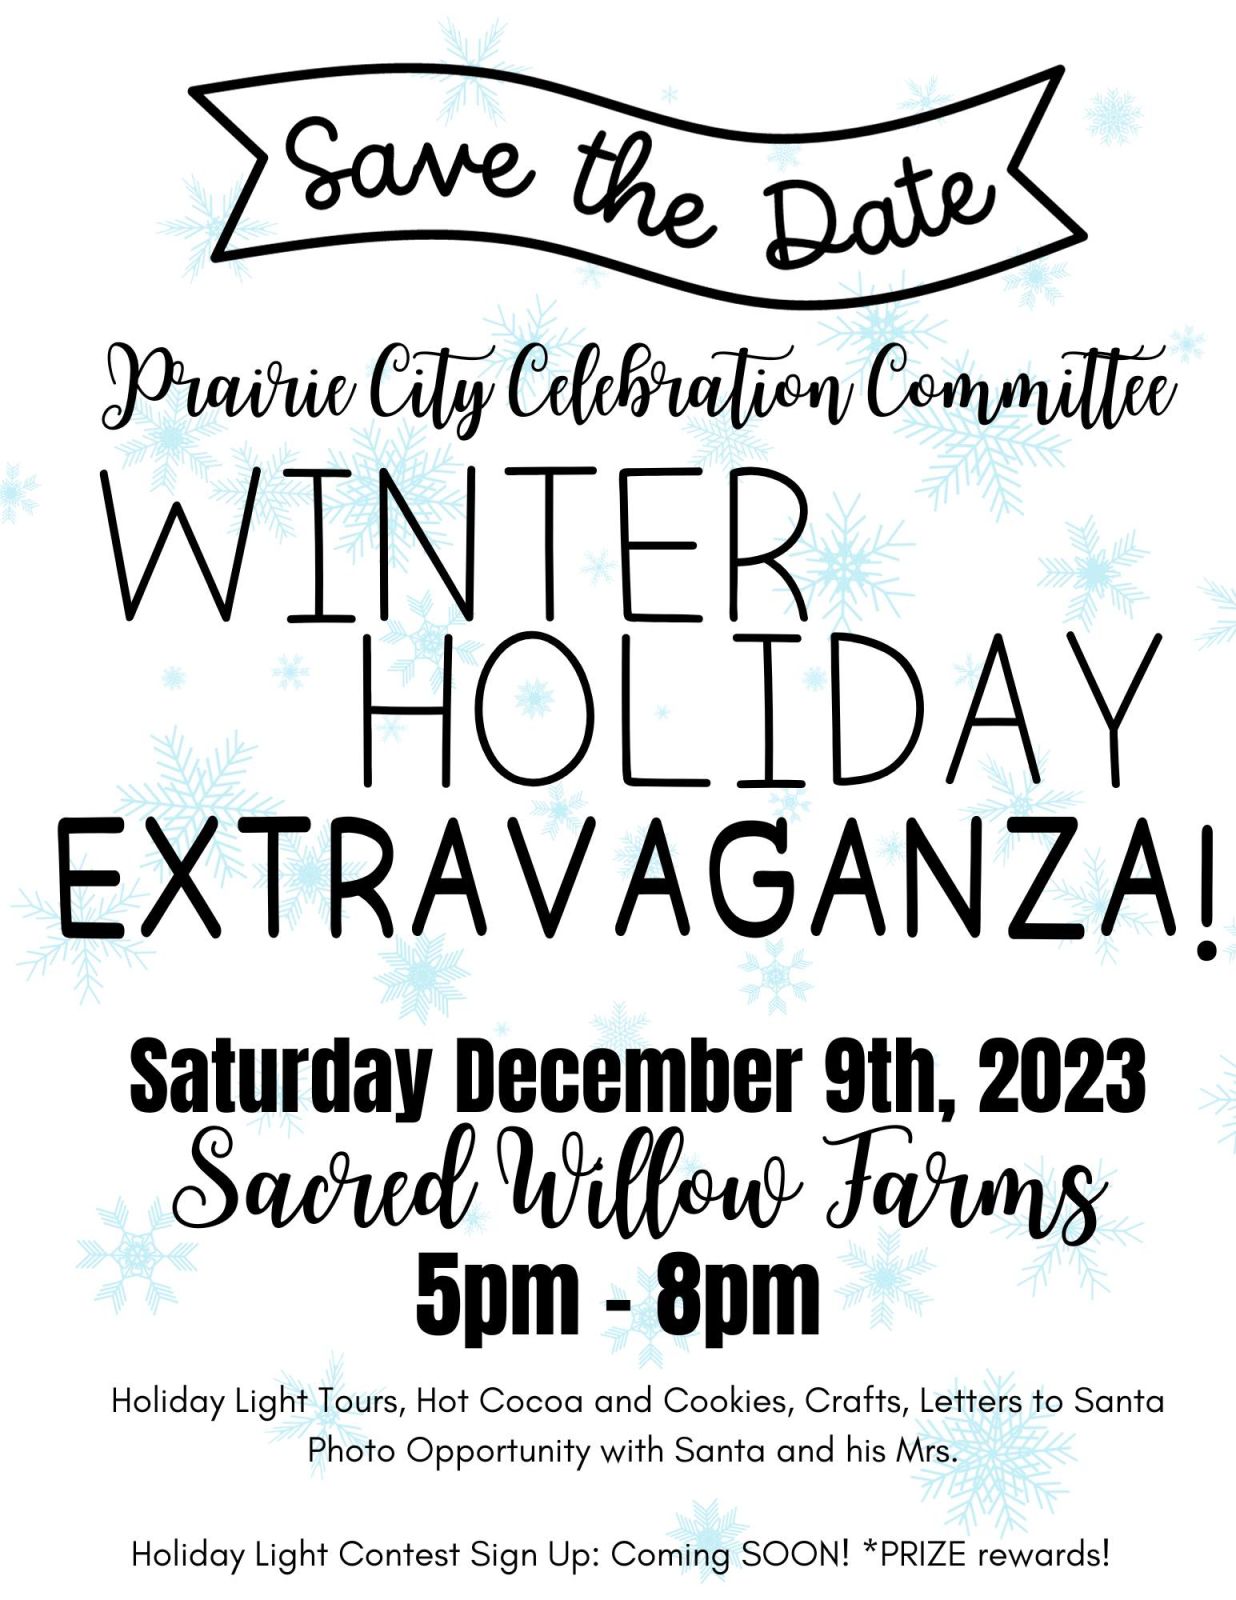 Event Promo Photo For Winter Holiday Extravaganza